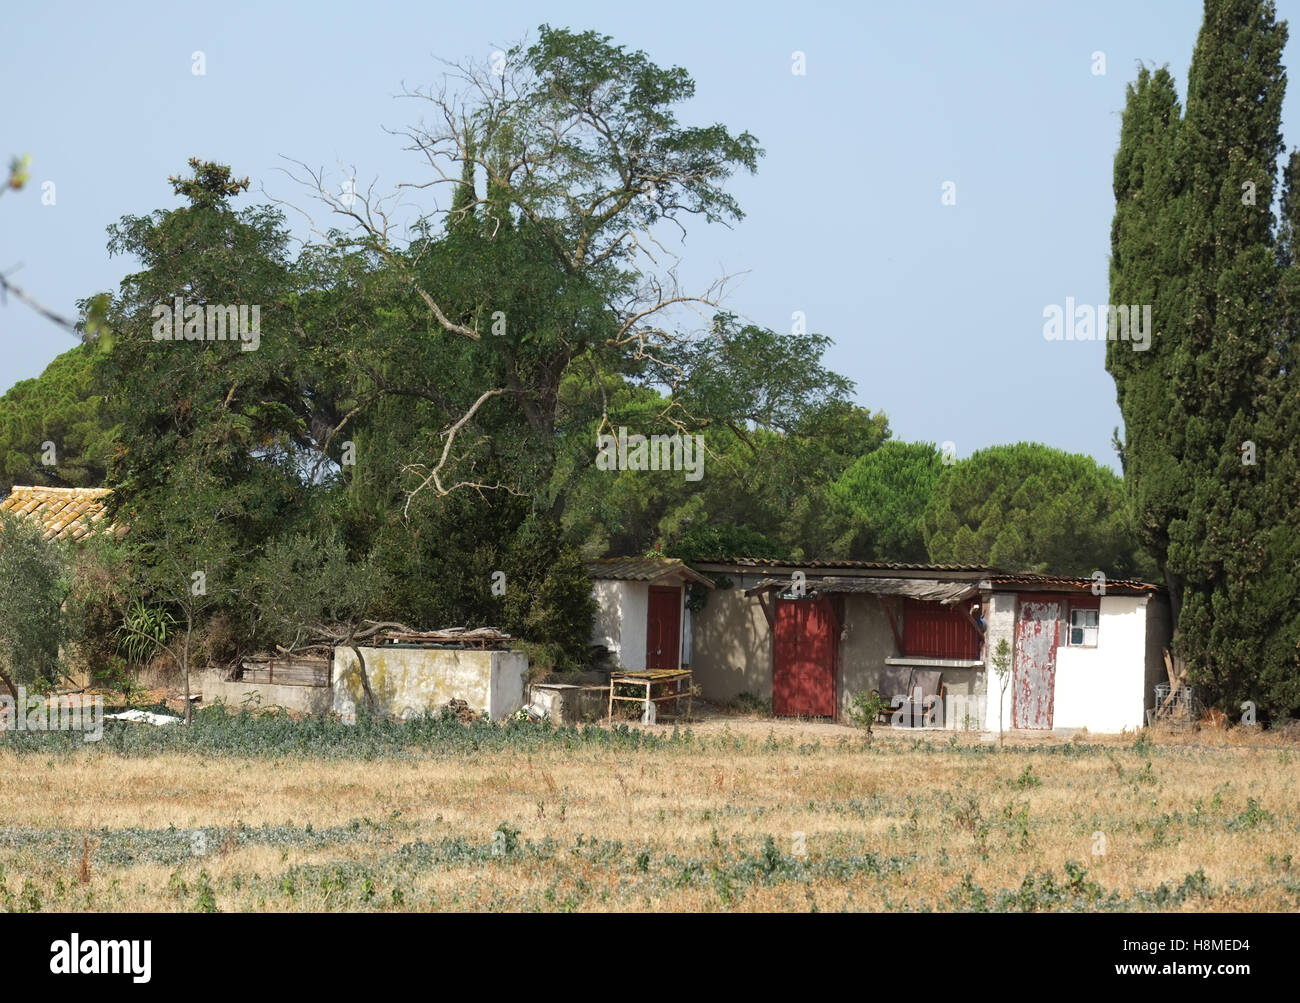 old character french architecture showing an outdoor shed, stable or store in the heat of summer Stock Photo